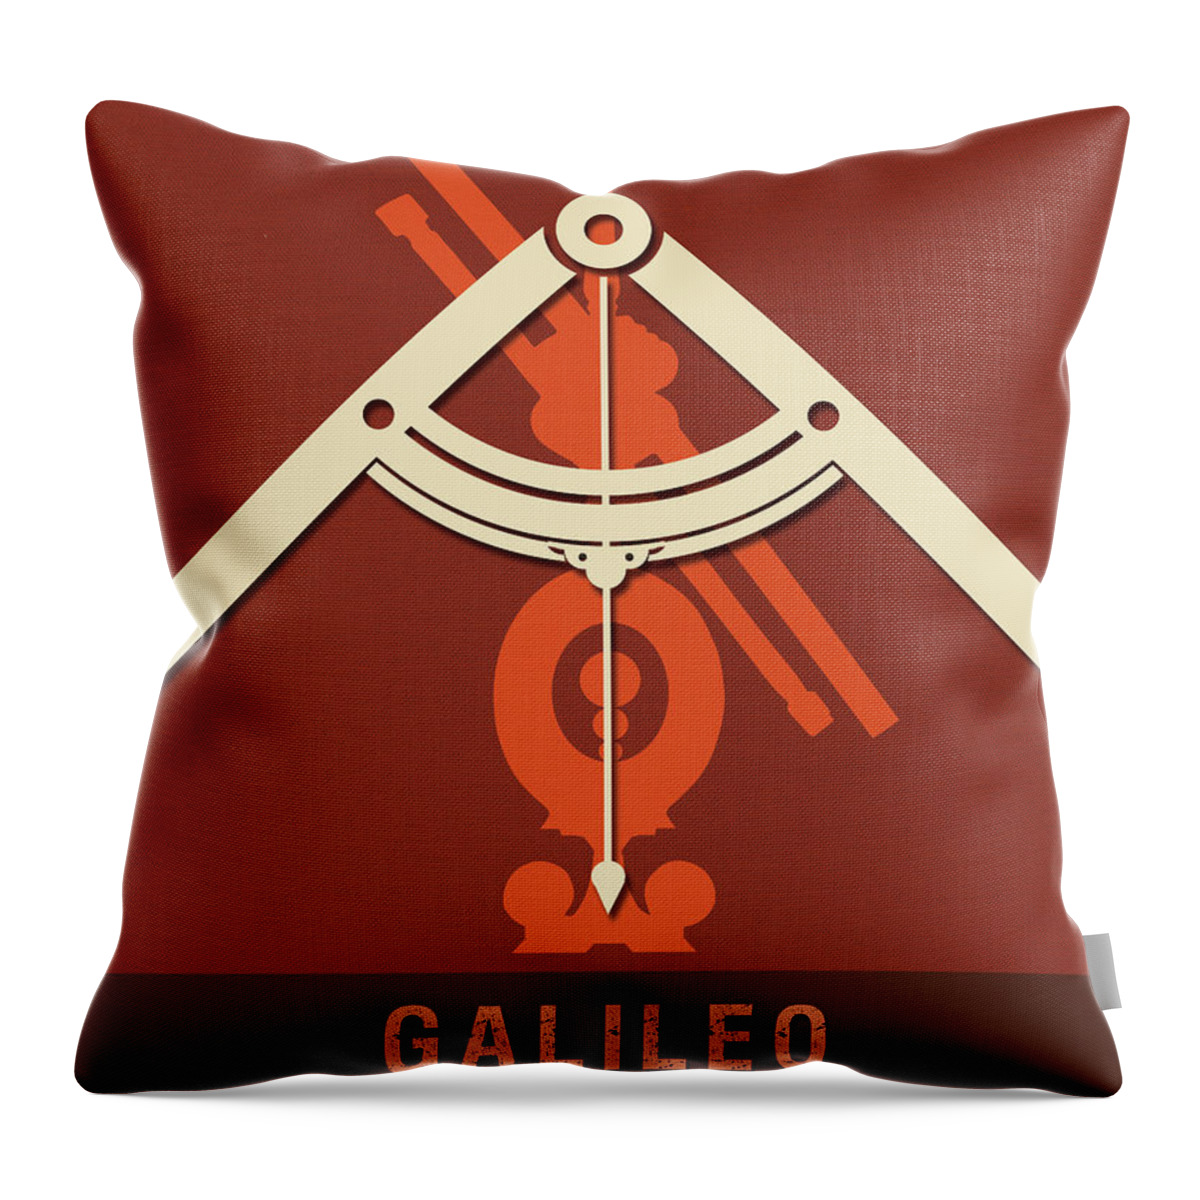 Galileo Throw Pillow featuring the mixed media Science Posters - Galileo Galilei - Astronomer, Physicist, Mathematician by Studio Grafiikka